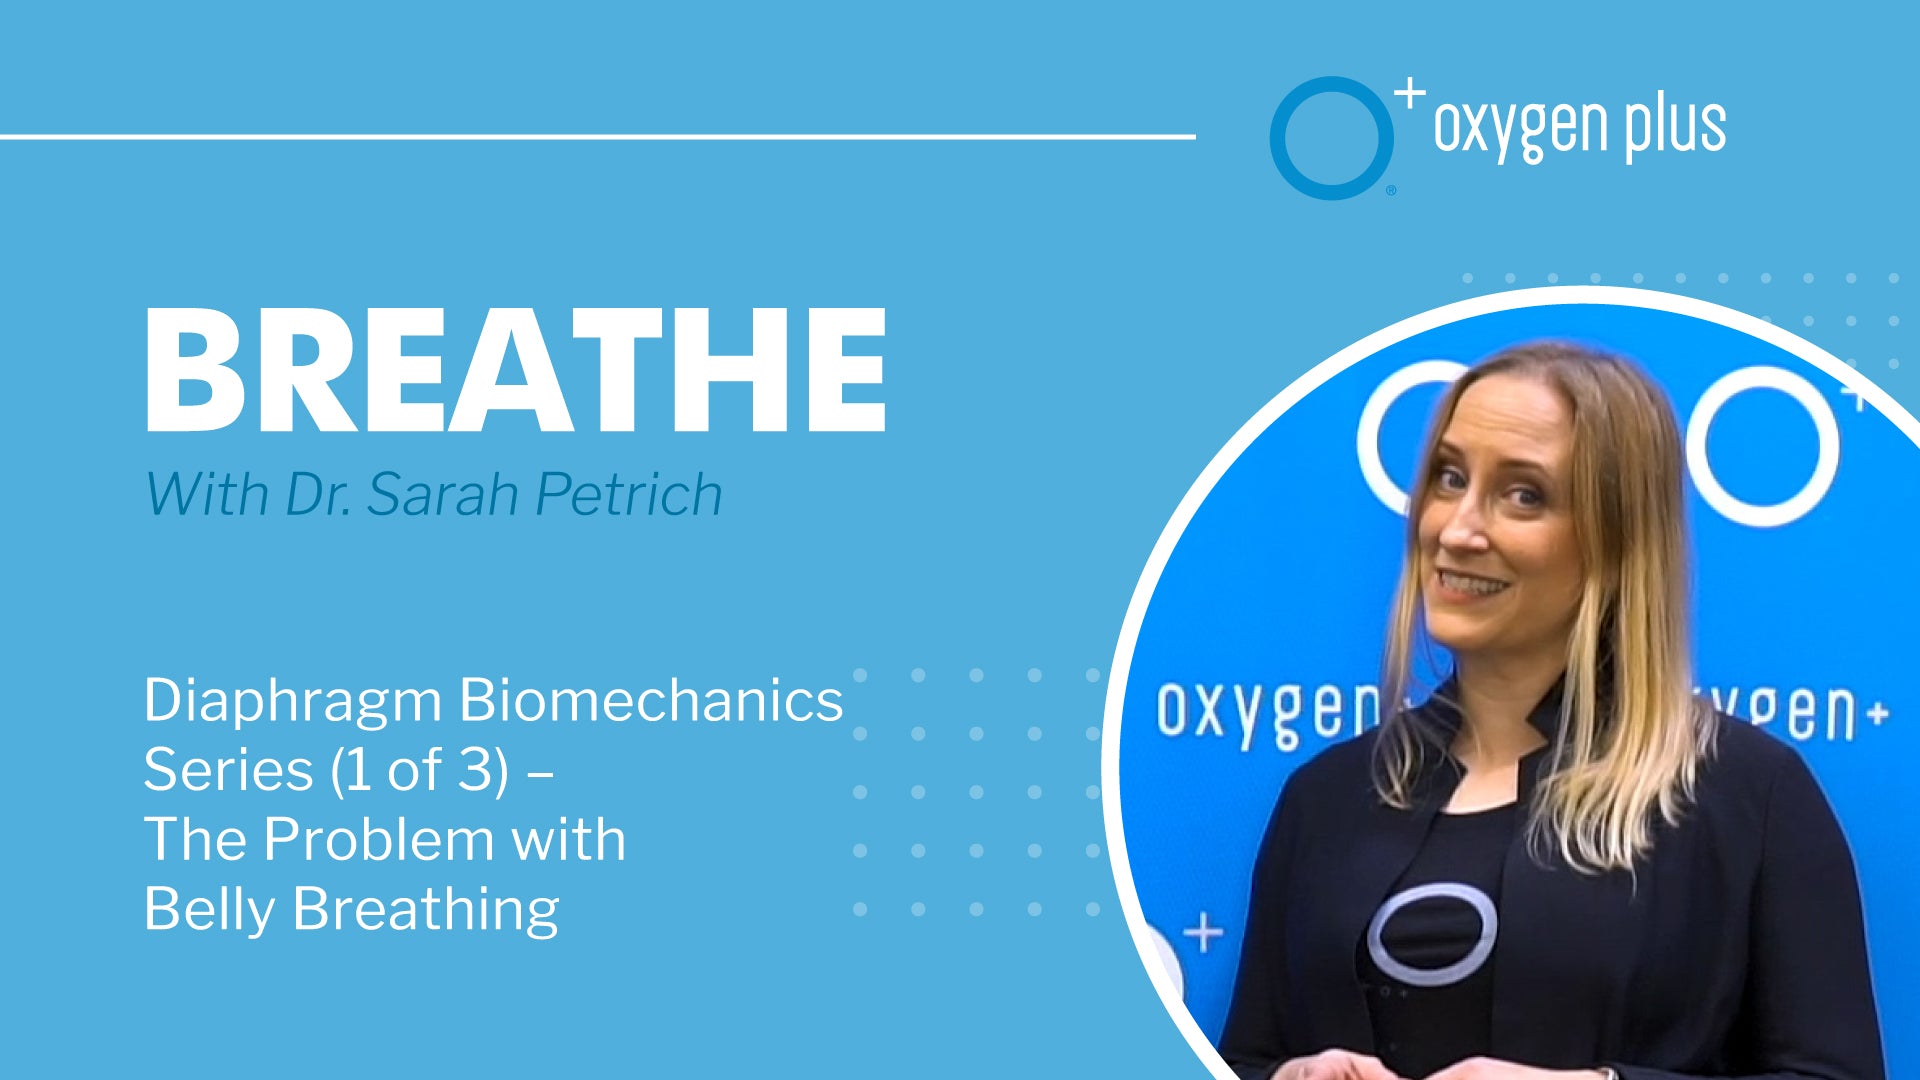 Diaphragm Biomechanics Series (1 of 3): "The Problem with Belly Breathing" with Dr. Sarah Petrich